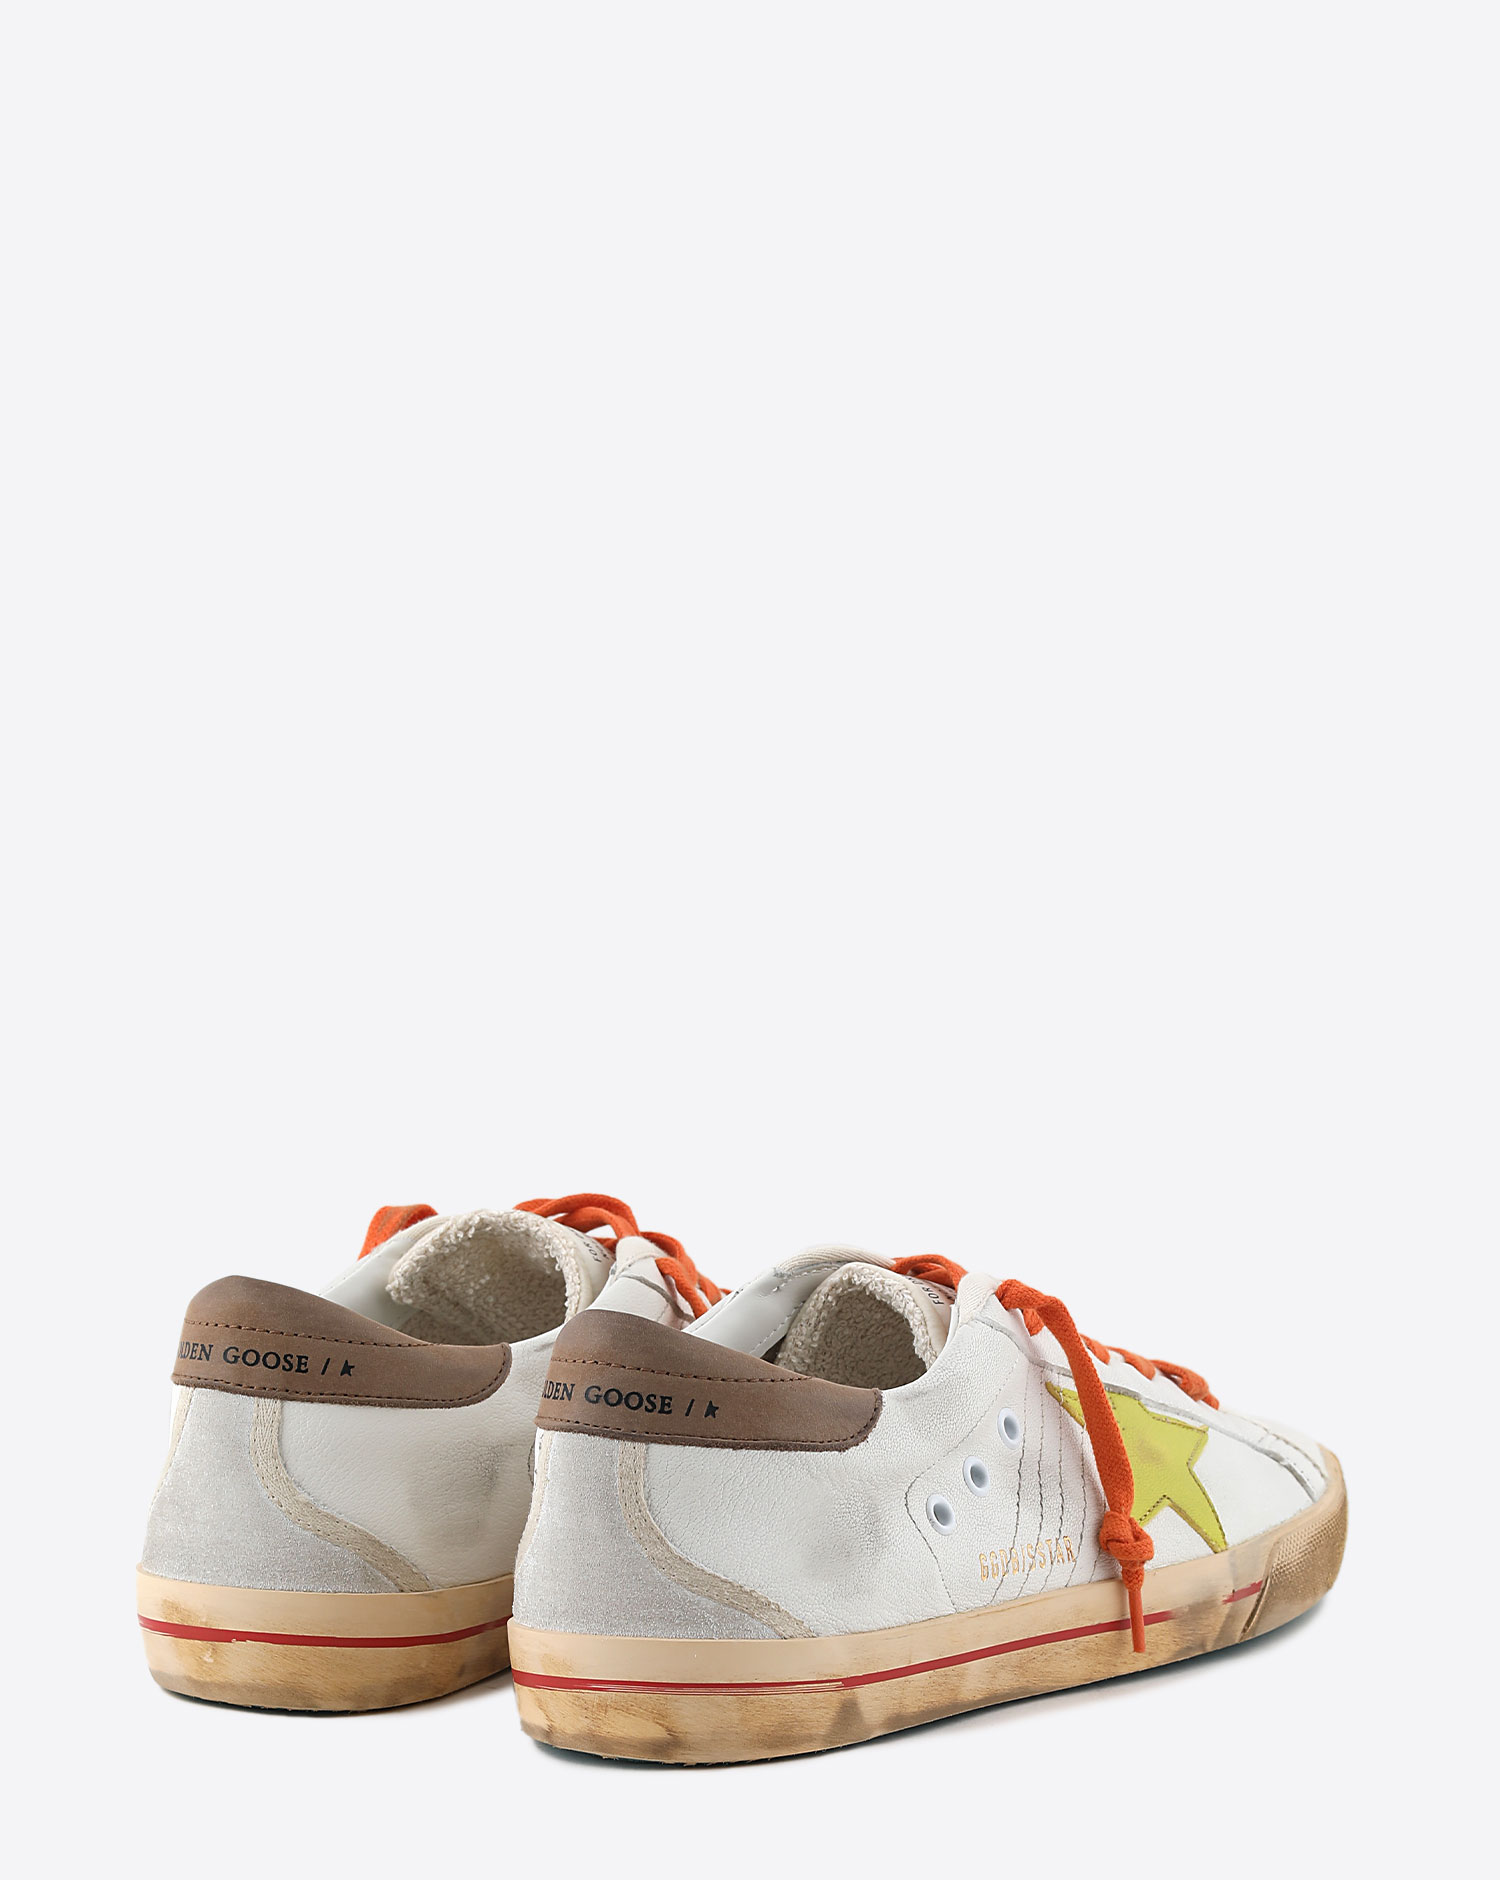 Sneakers Homme Super-Star White Citronelle Taupe 11384 Golden Goose 